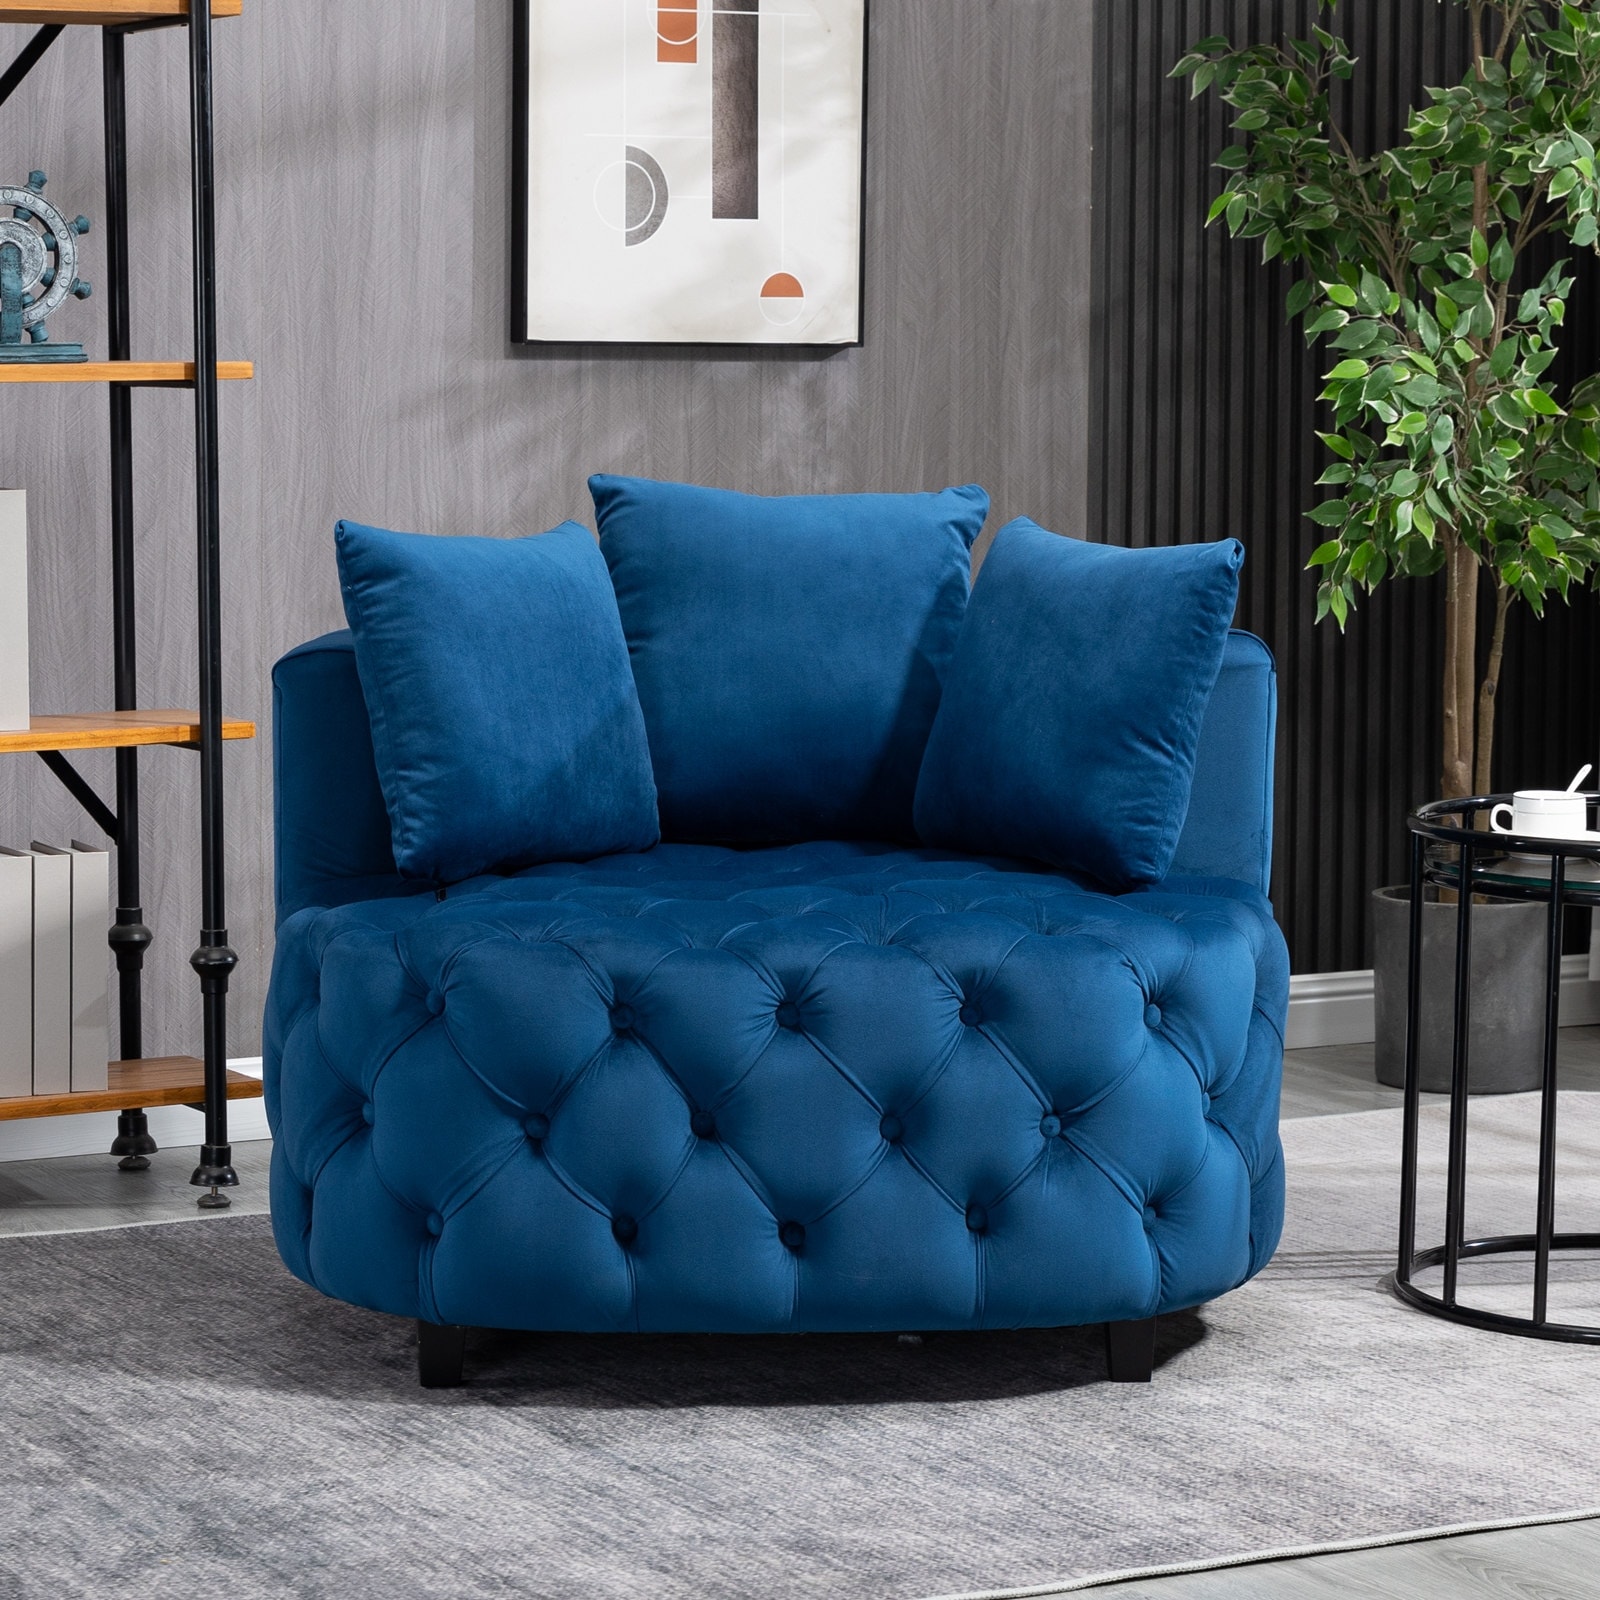 Velvet Single Person Sofa Chair - Solid Wood Legs, High Backrest, Thickened  Soft Cushion, and a Pillow. - Bed Bath & Beyond - 38908262